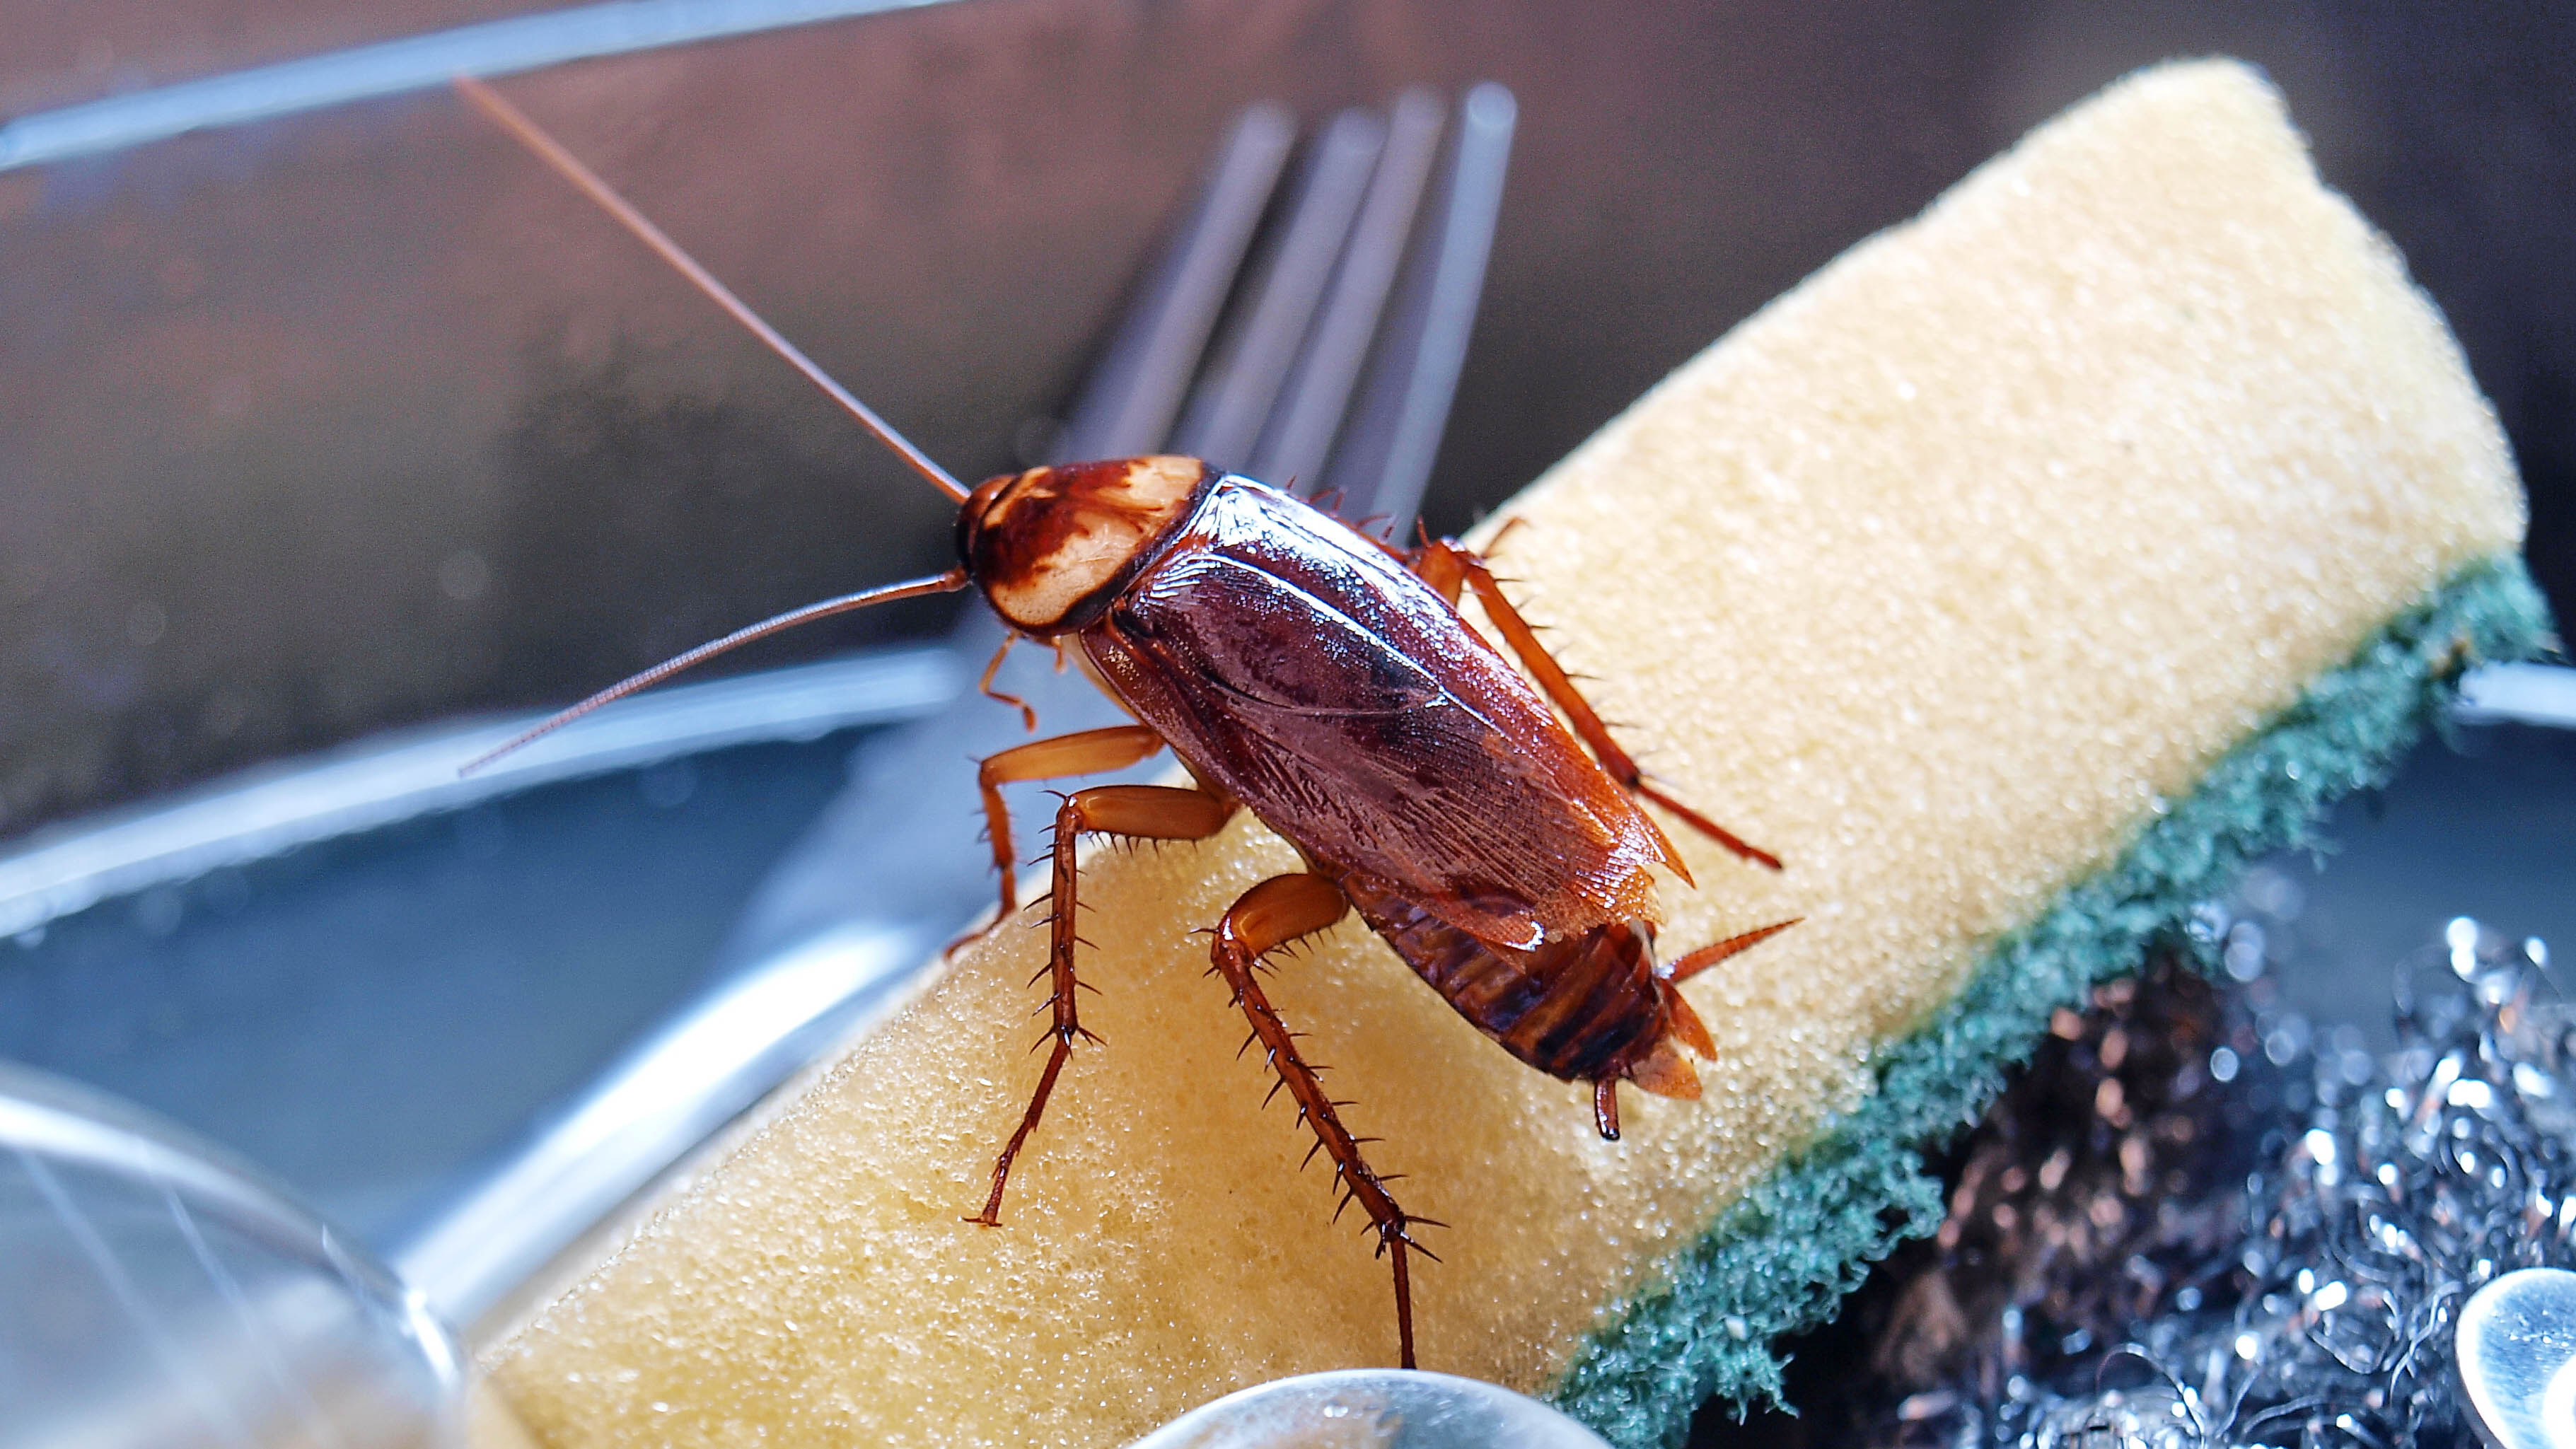 How To Get Rid Of Roaches In Your Home